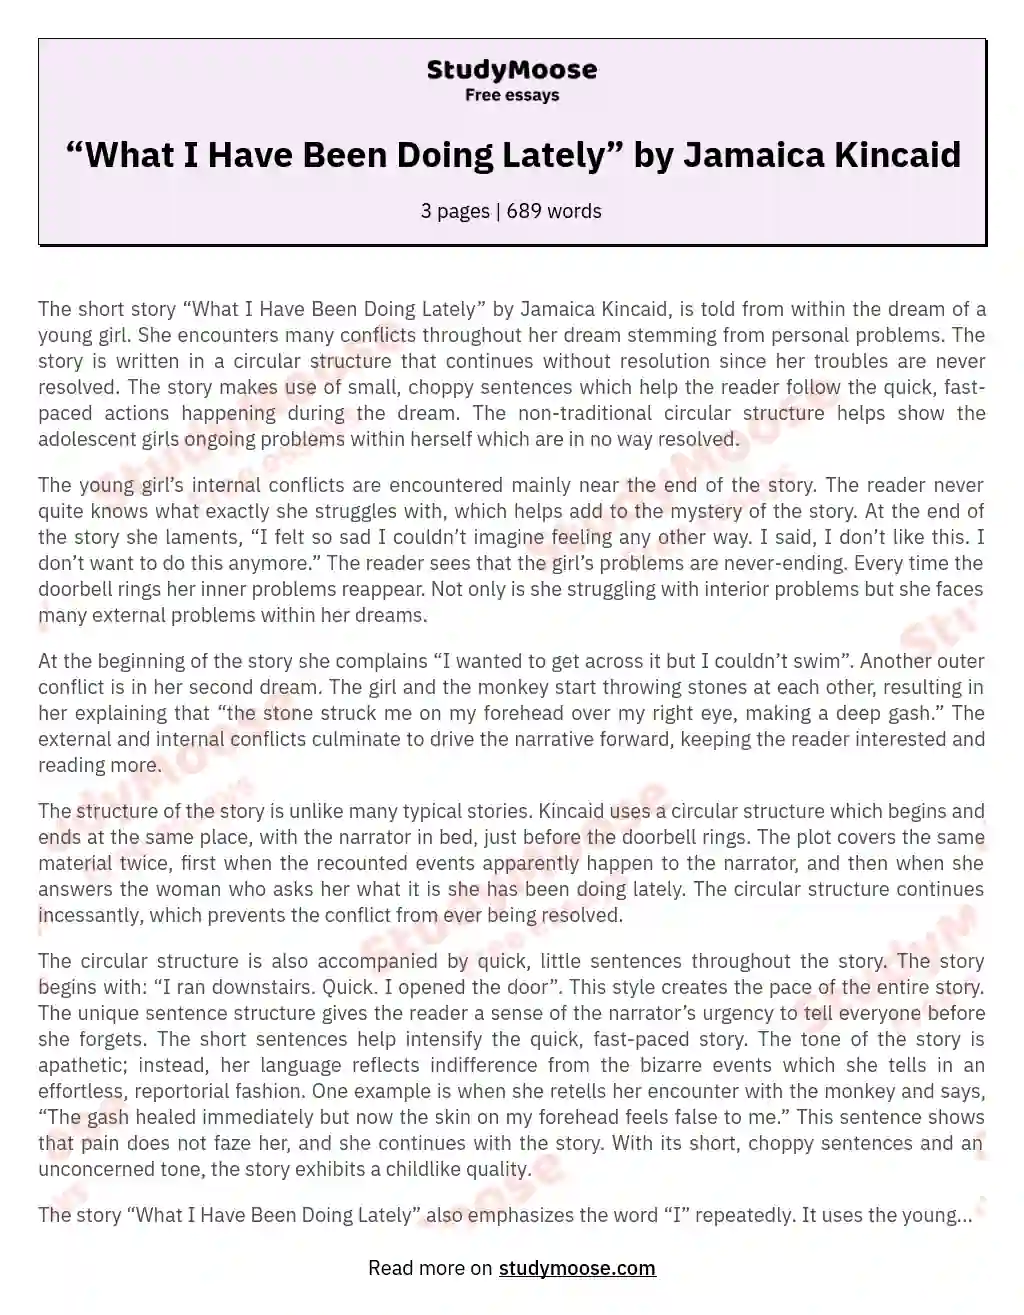 “What I Have Been Doing Lately” by Jamaica Kincaid essay